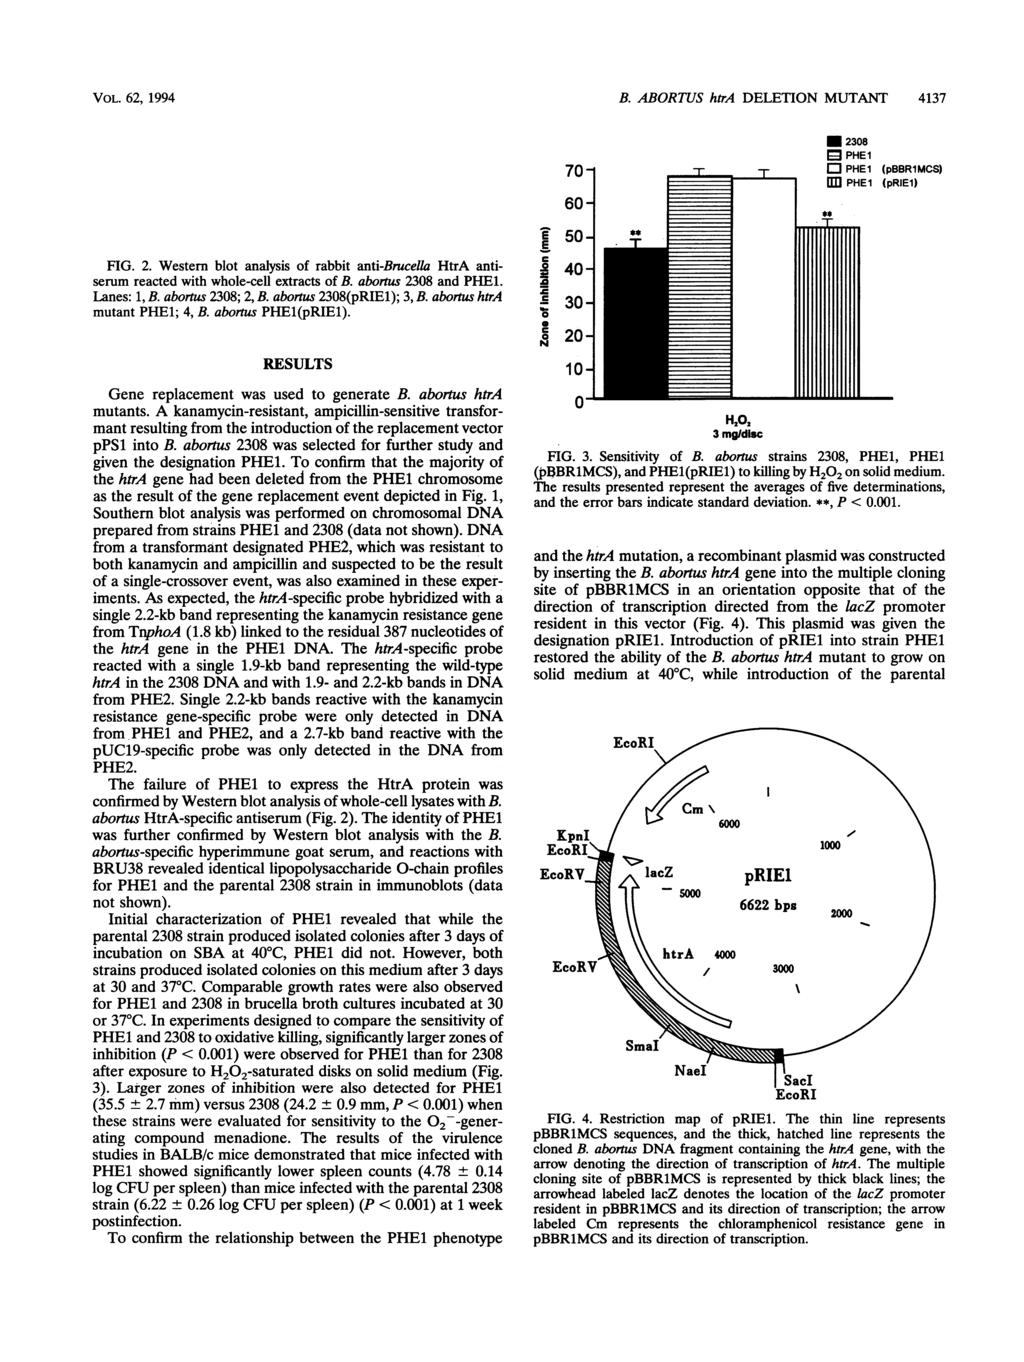 VOL. 62, 1994 B. ABORTUS htra DELETION MUTANT 4137 HtrA-*- 5;s r 2 FIG. 2. Western blot analysis of rabbit anti-brucella HtrA antiserum reacted with whole-cell extracts of B abornus 2308 and PHEL.